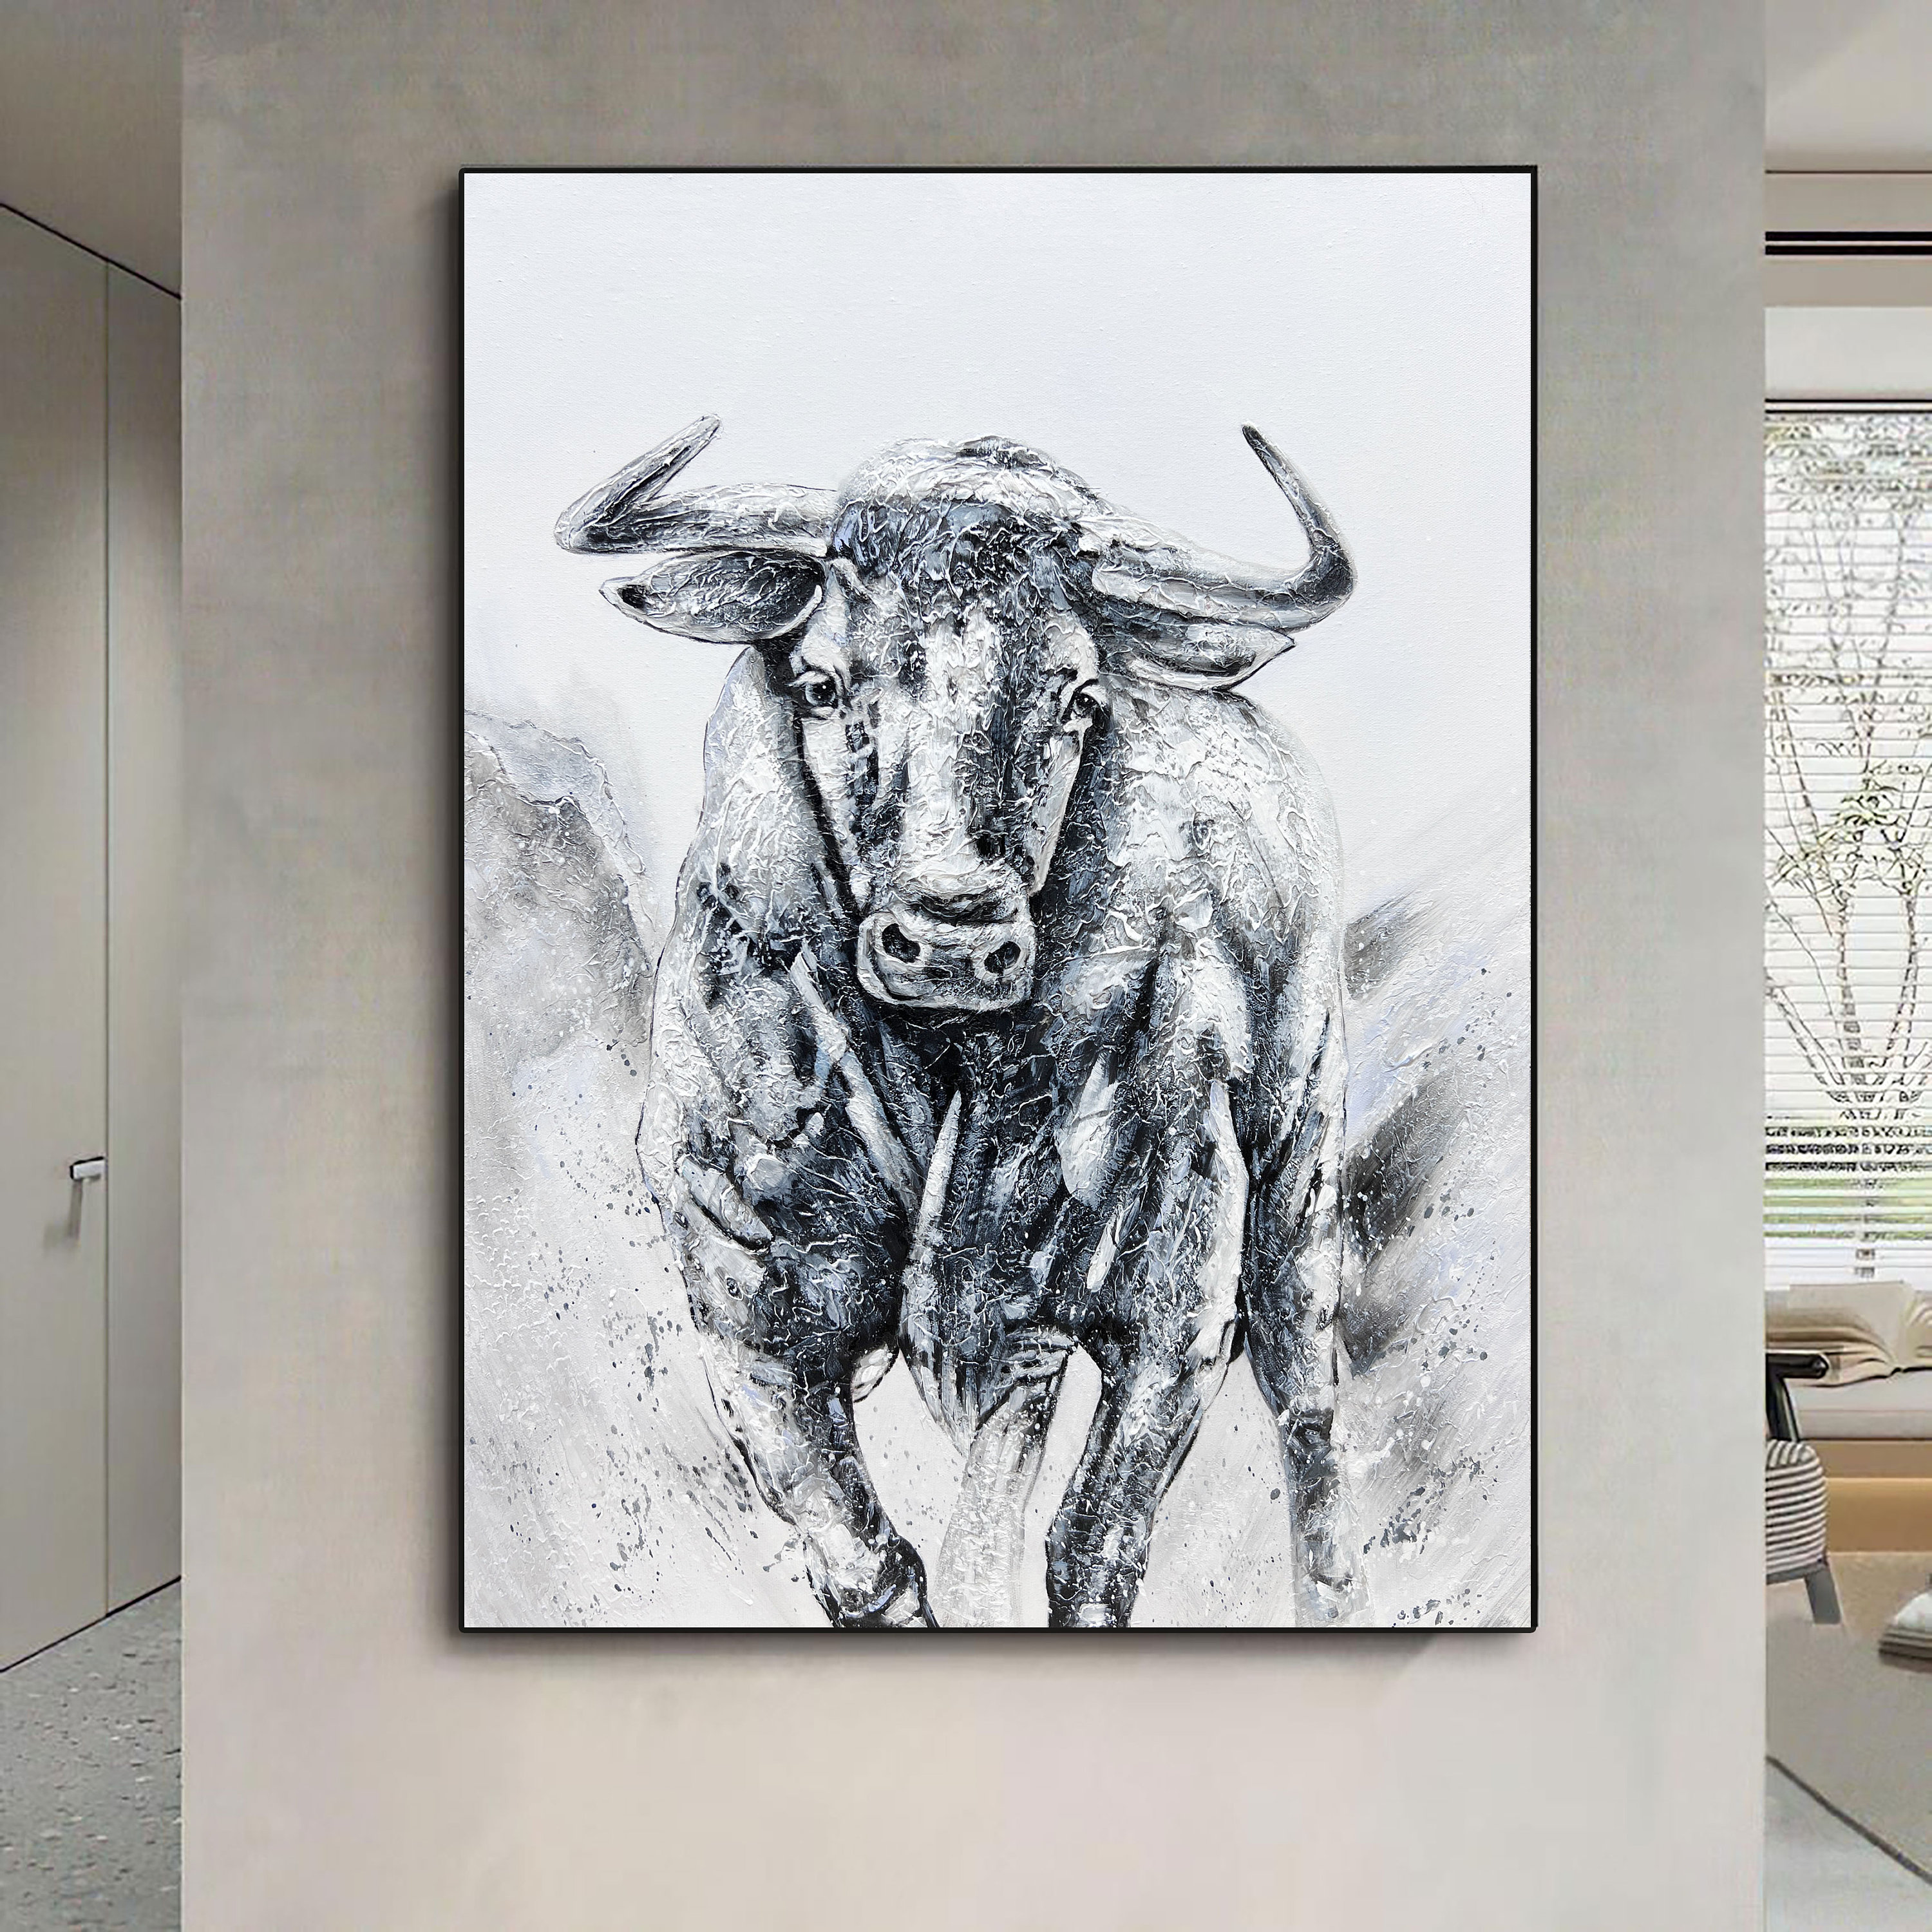 Original Bull Canvas Abstract Oil Painting Angry Bull Wall